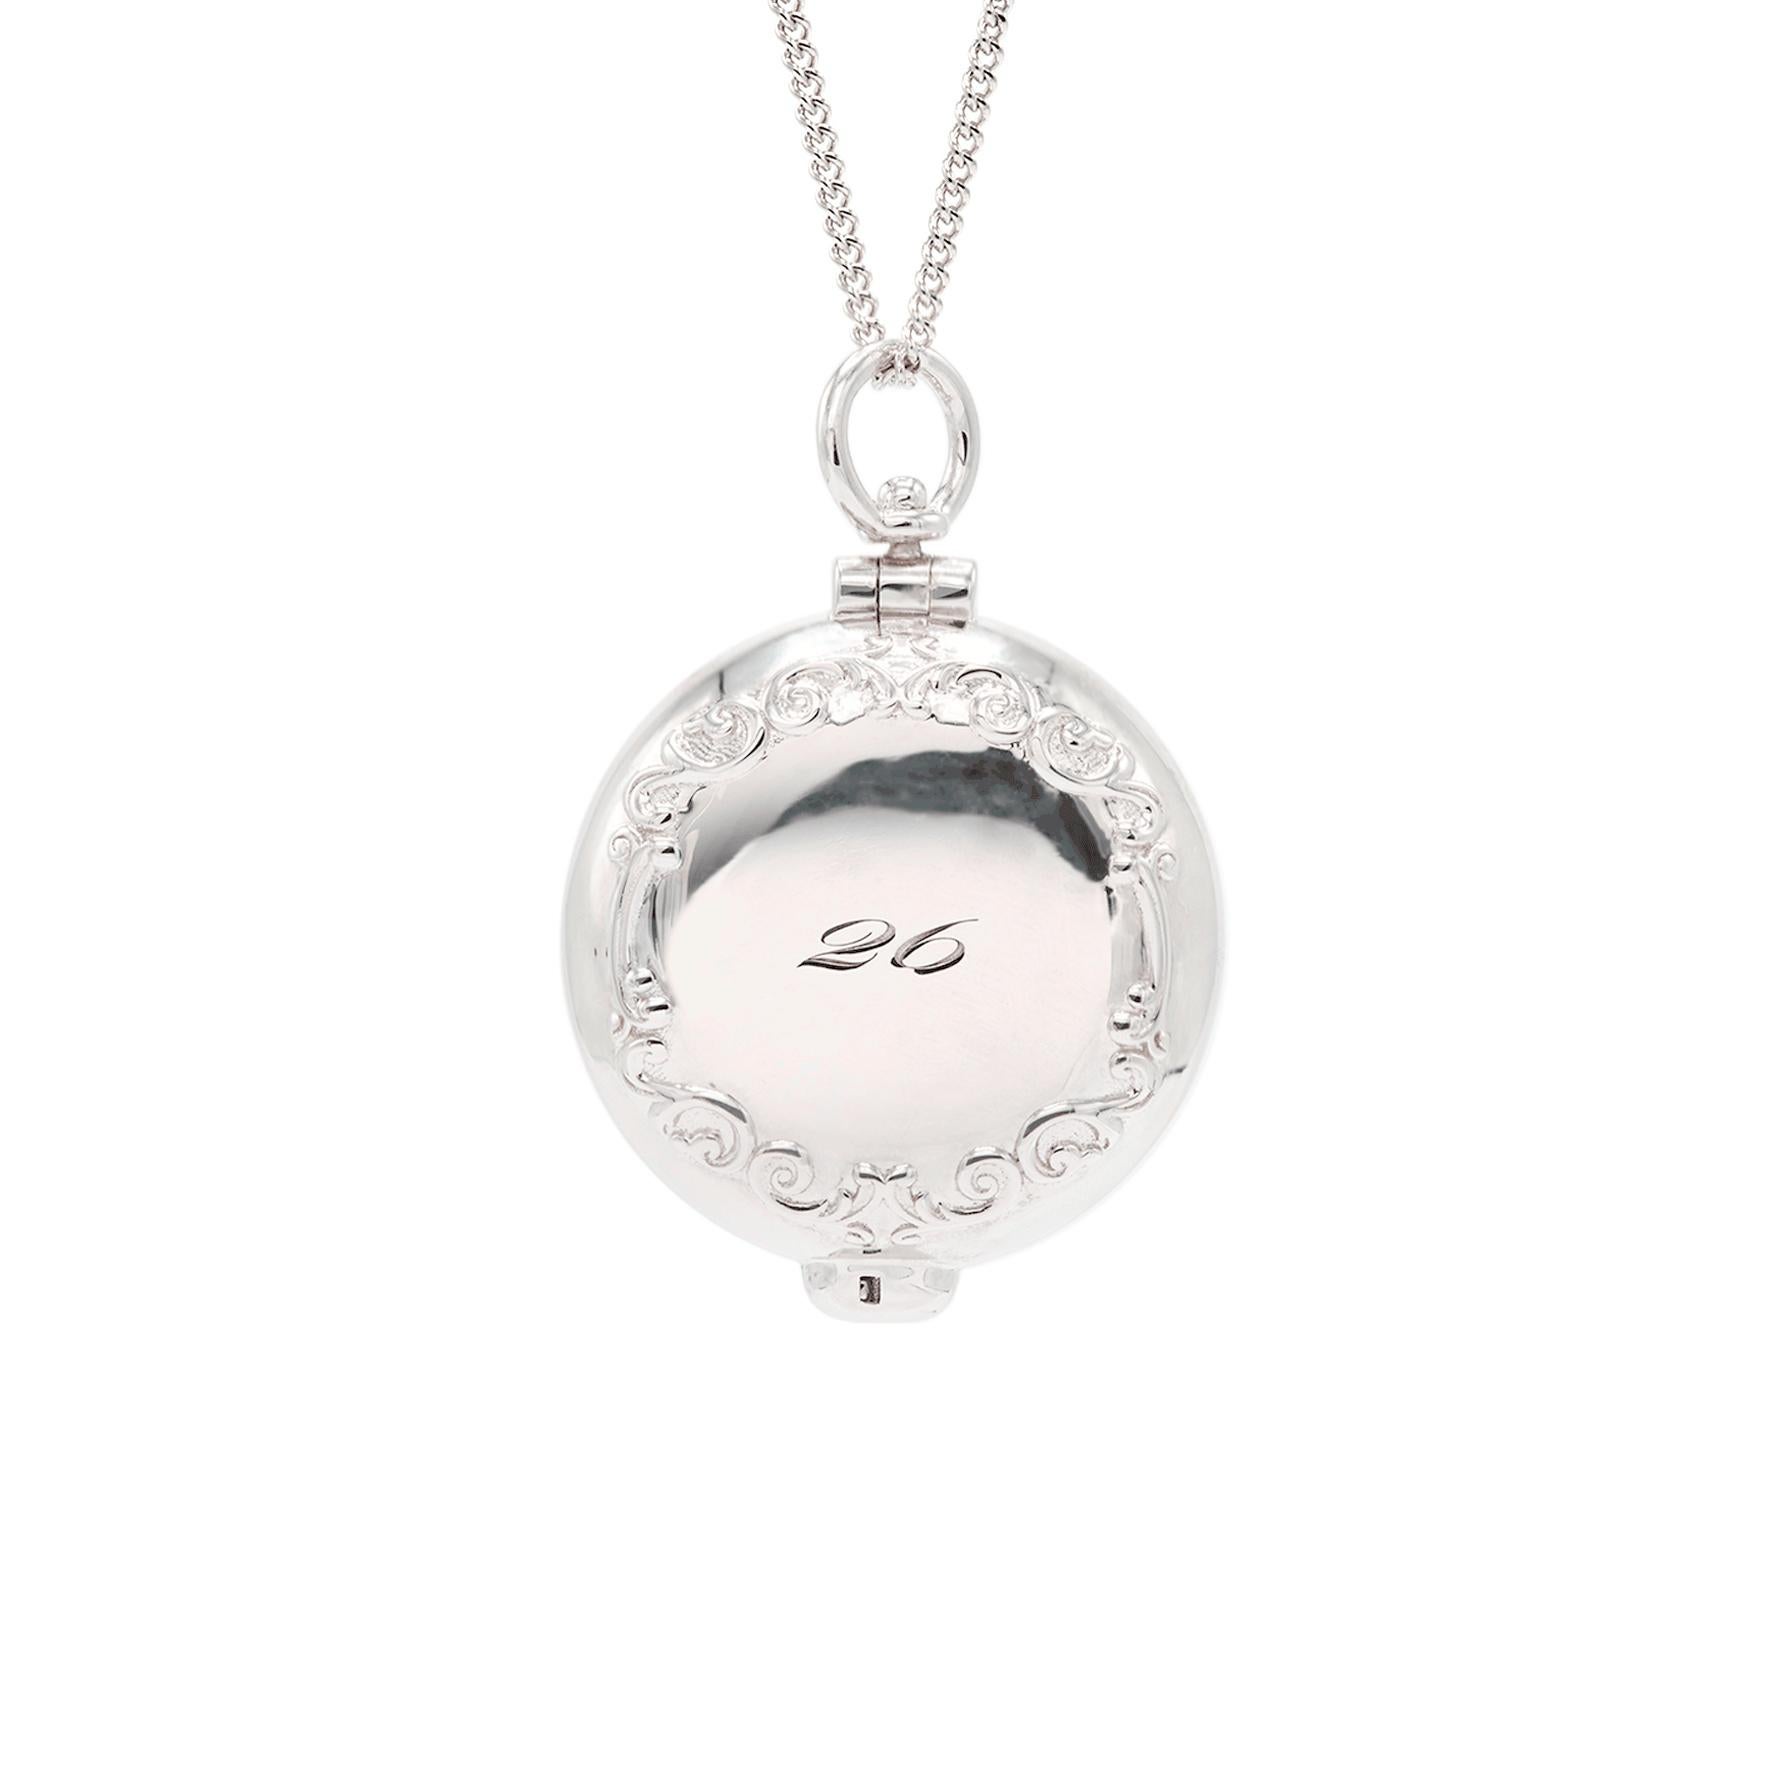 Our special pleasure collection for everyday wear, setting with round cubic zirconia and a petite mirror inside. You could check your make-up every send and stay sparkle!

Dimensions:
25mm x 25mm, chain 60cm            
Composition: 
Sterling Silver